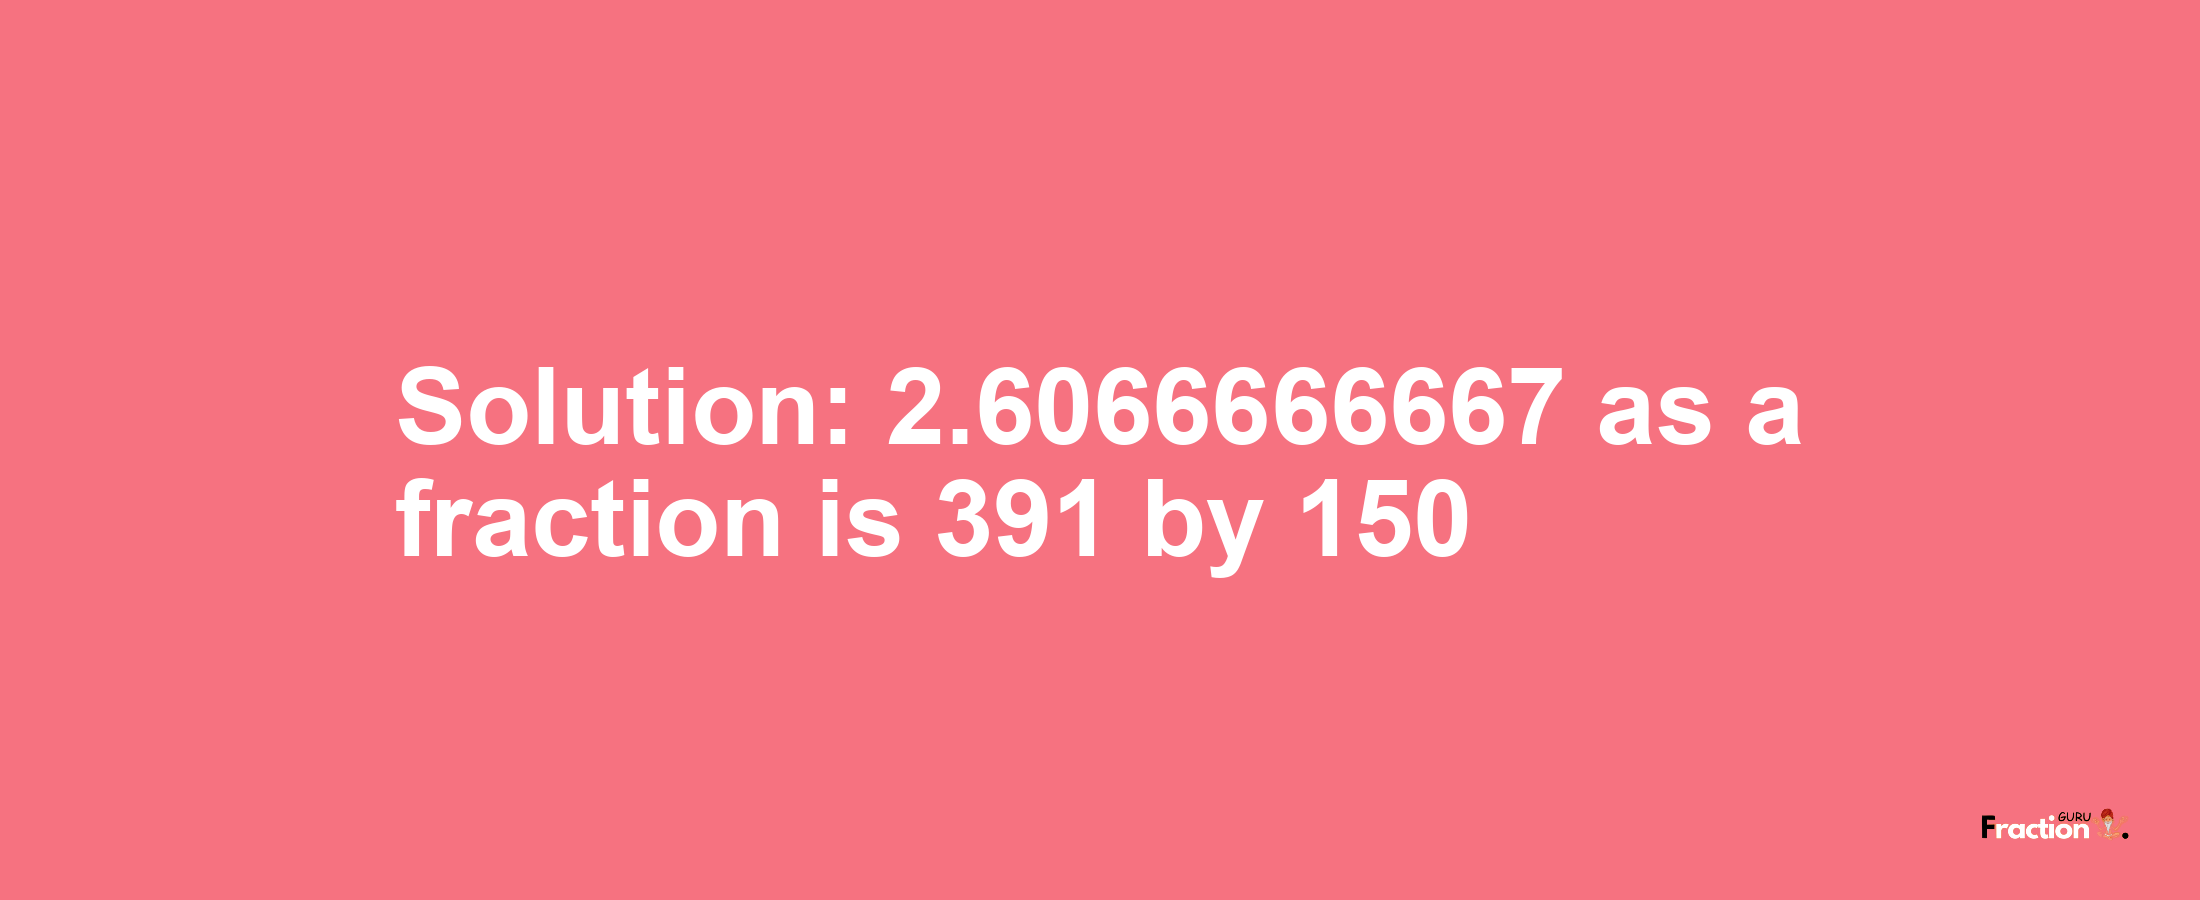 Solution:2.6066666667 as a fraction is 391/150